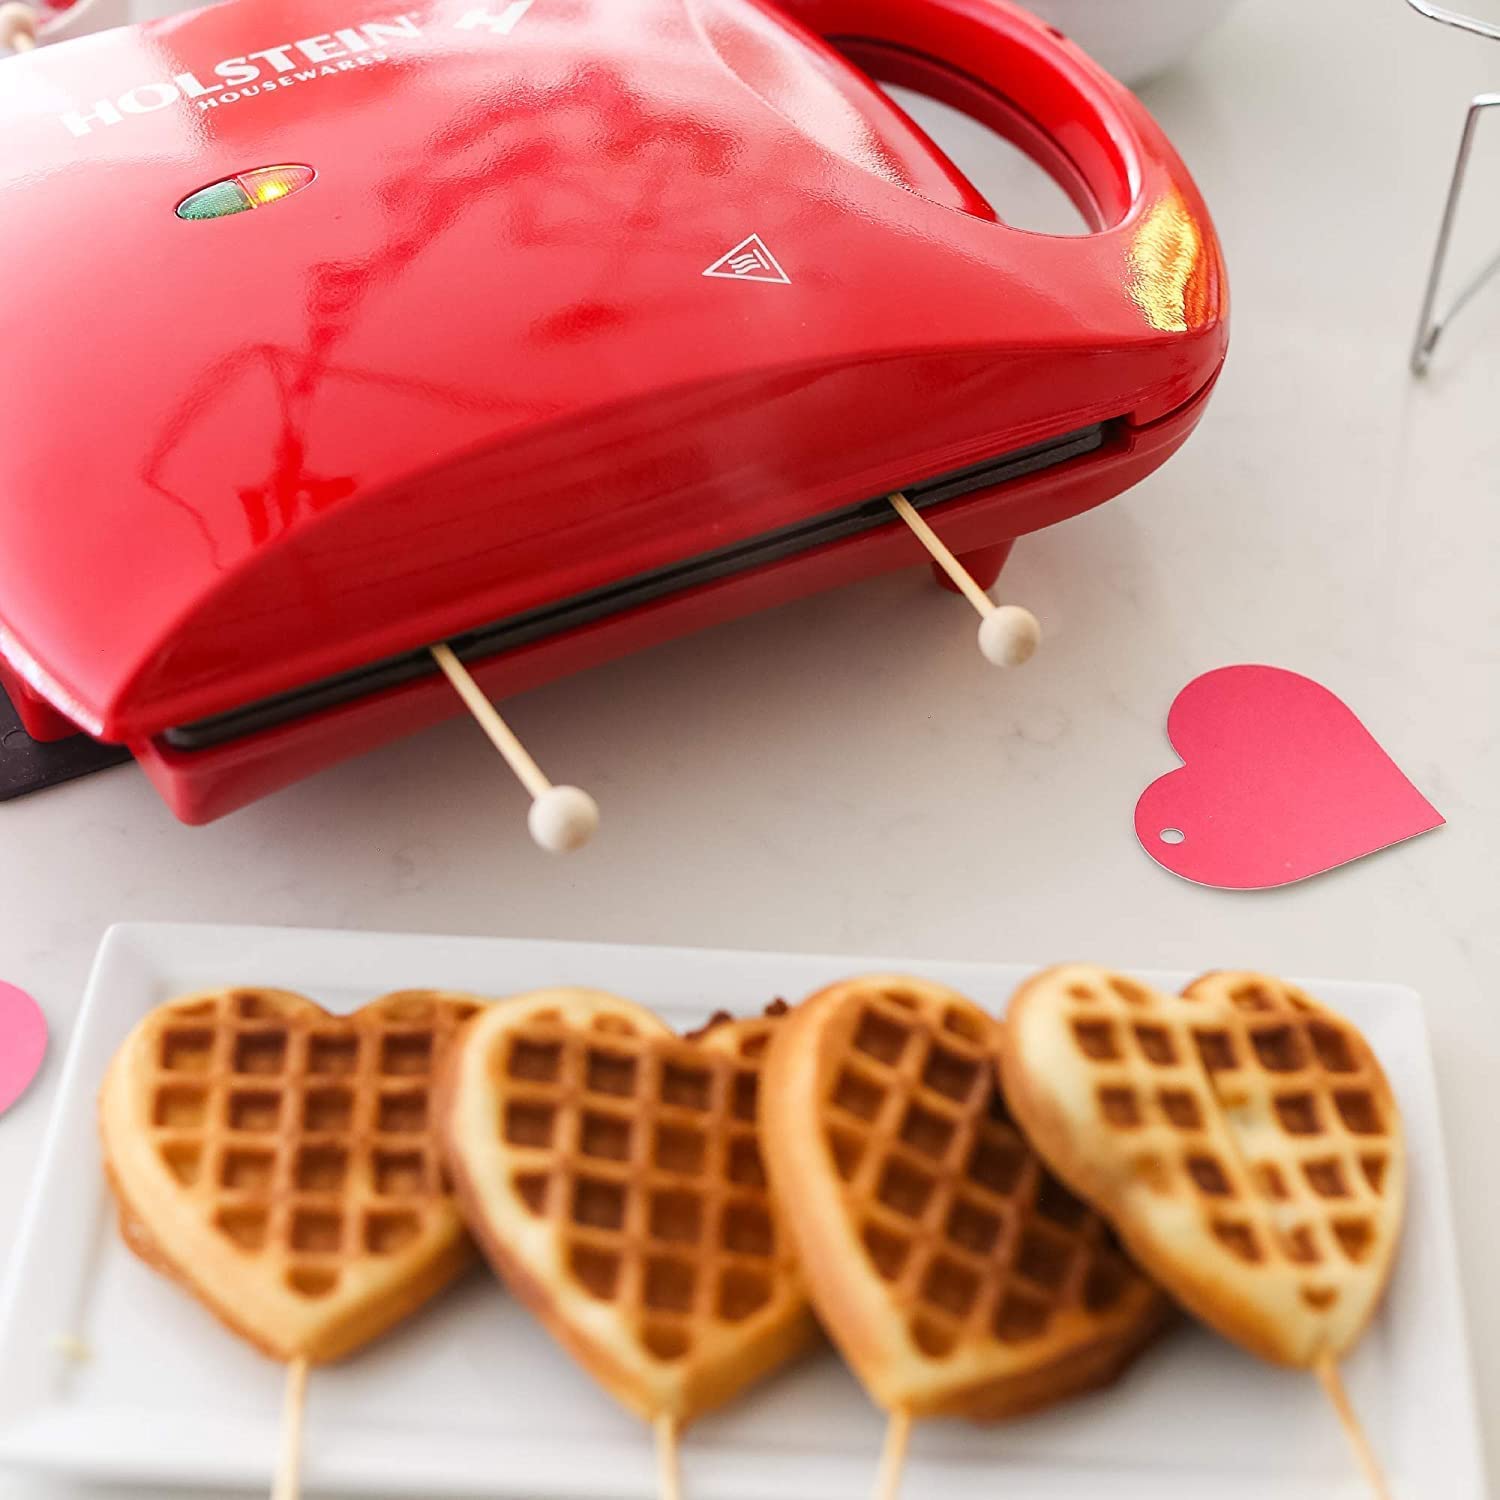 Holstein Housewares - Non-Stick Heart Waffle Maker, Lavender - Makes 4 Heart-Shaped Waffles in Minutes